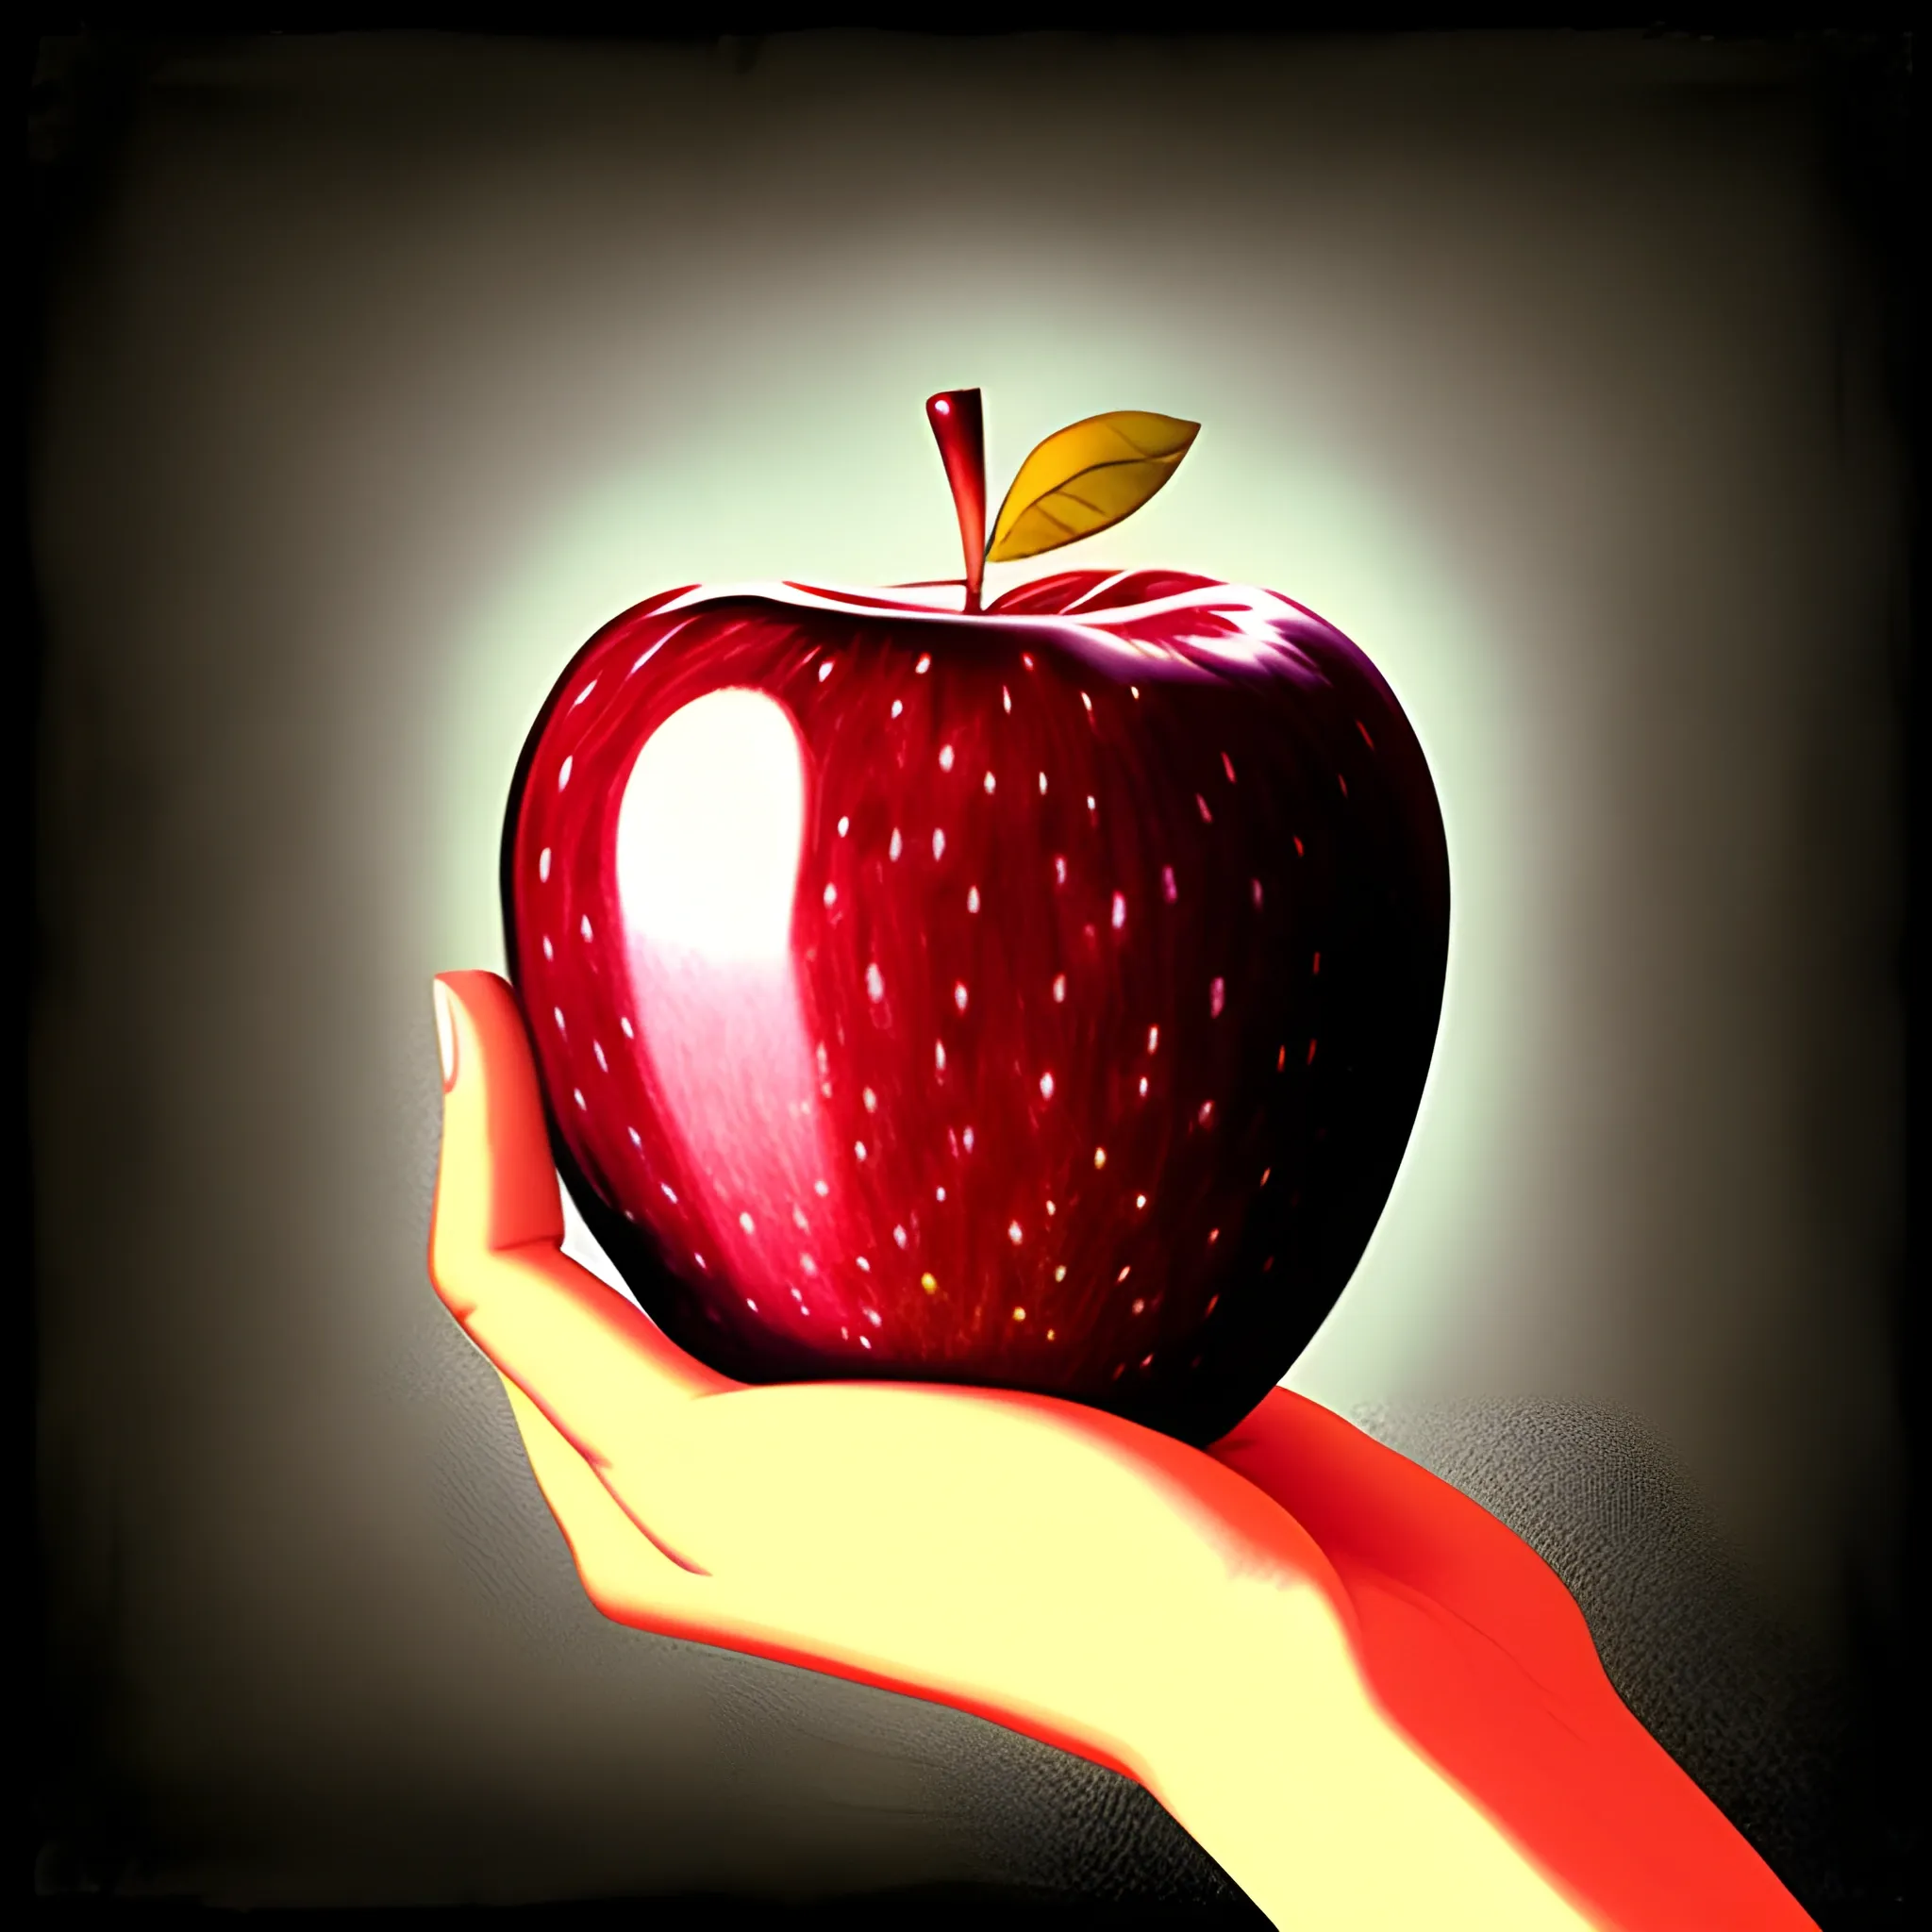 a hand holding an apple in surreal style, like a vintage drawing
